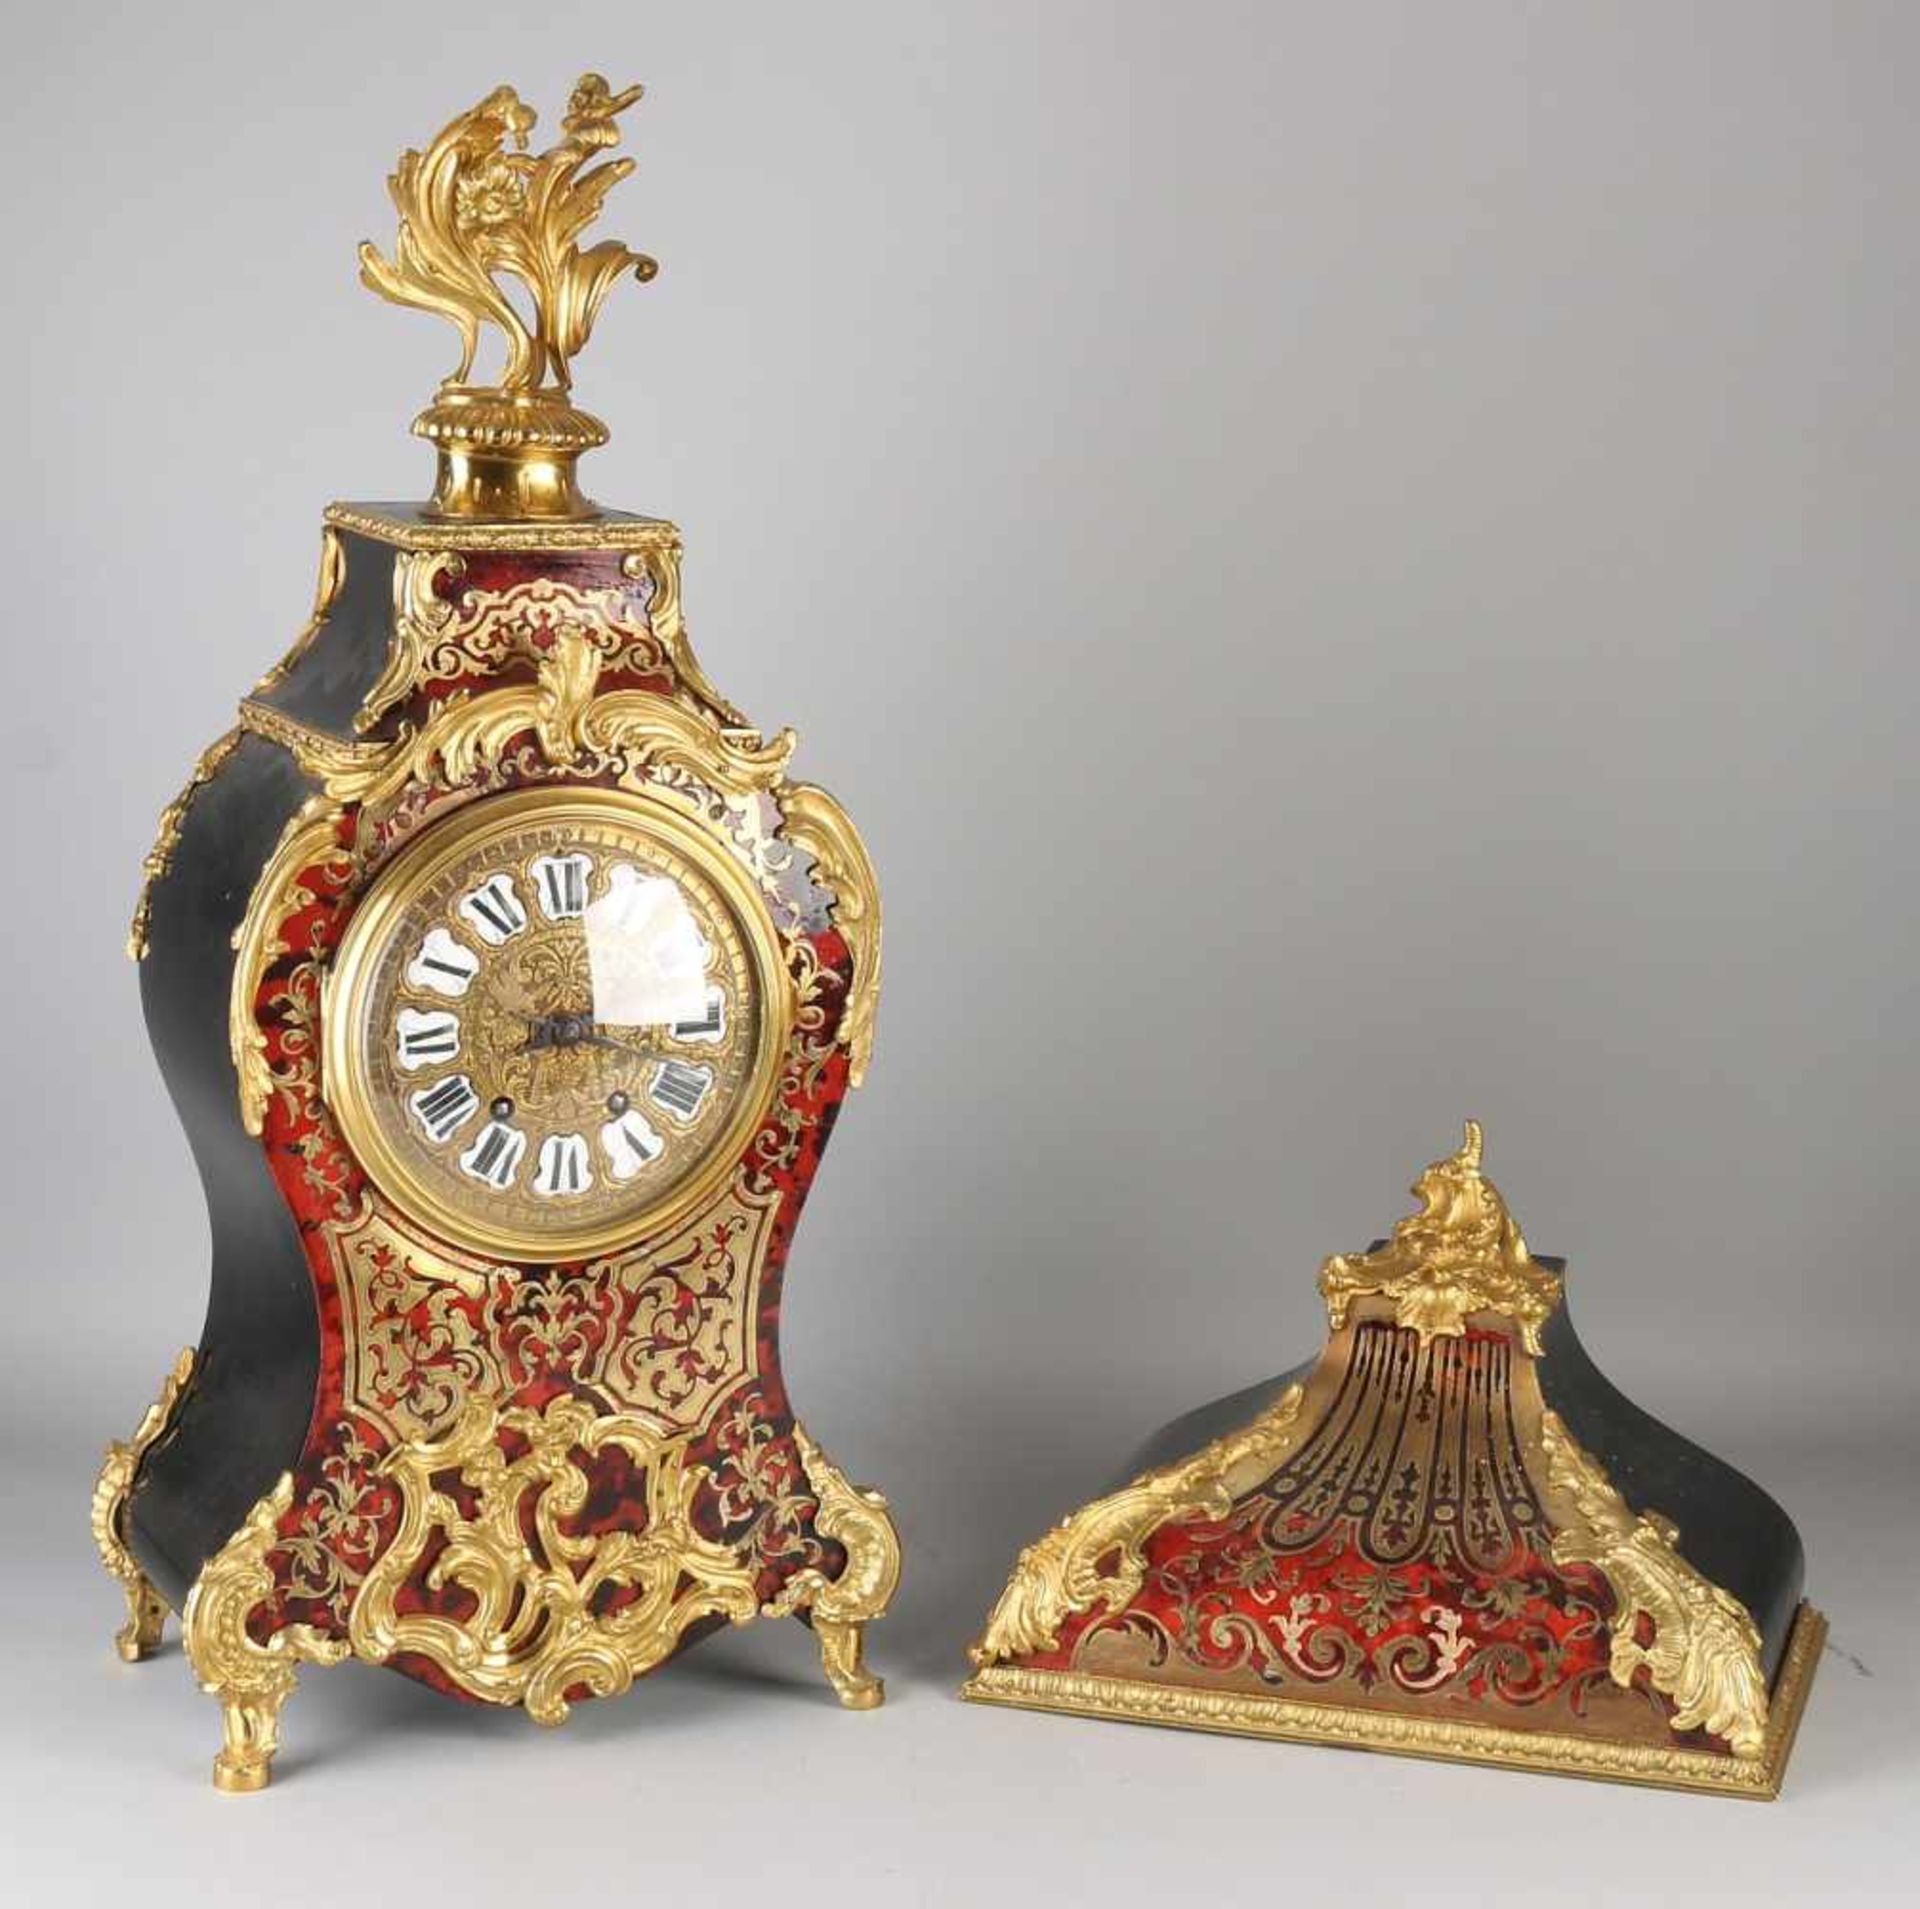 19th Century French red turtle boulle clock with original console and gilt bronze mounts. Circa